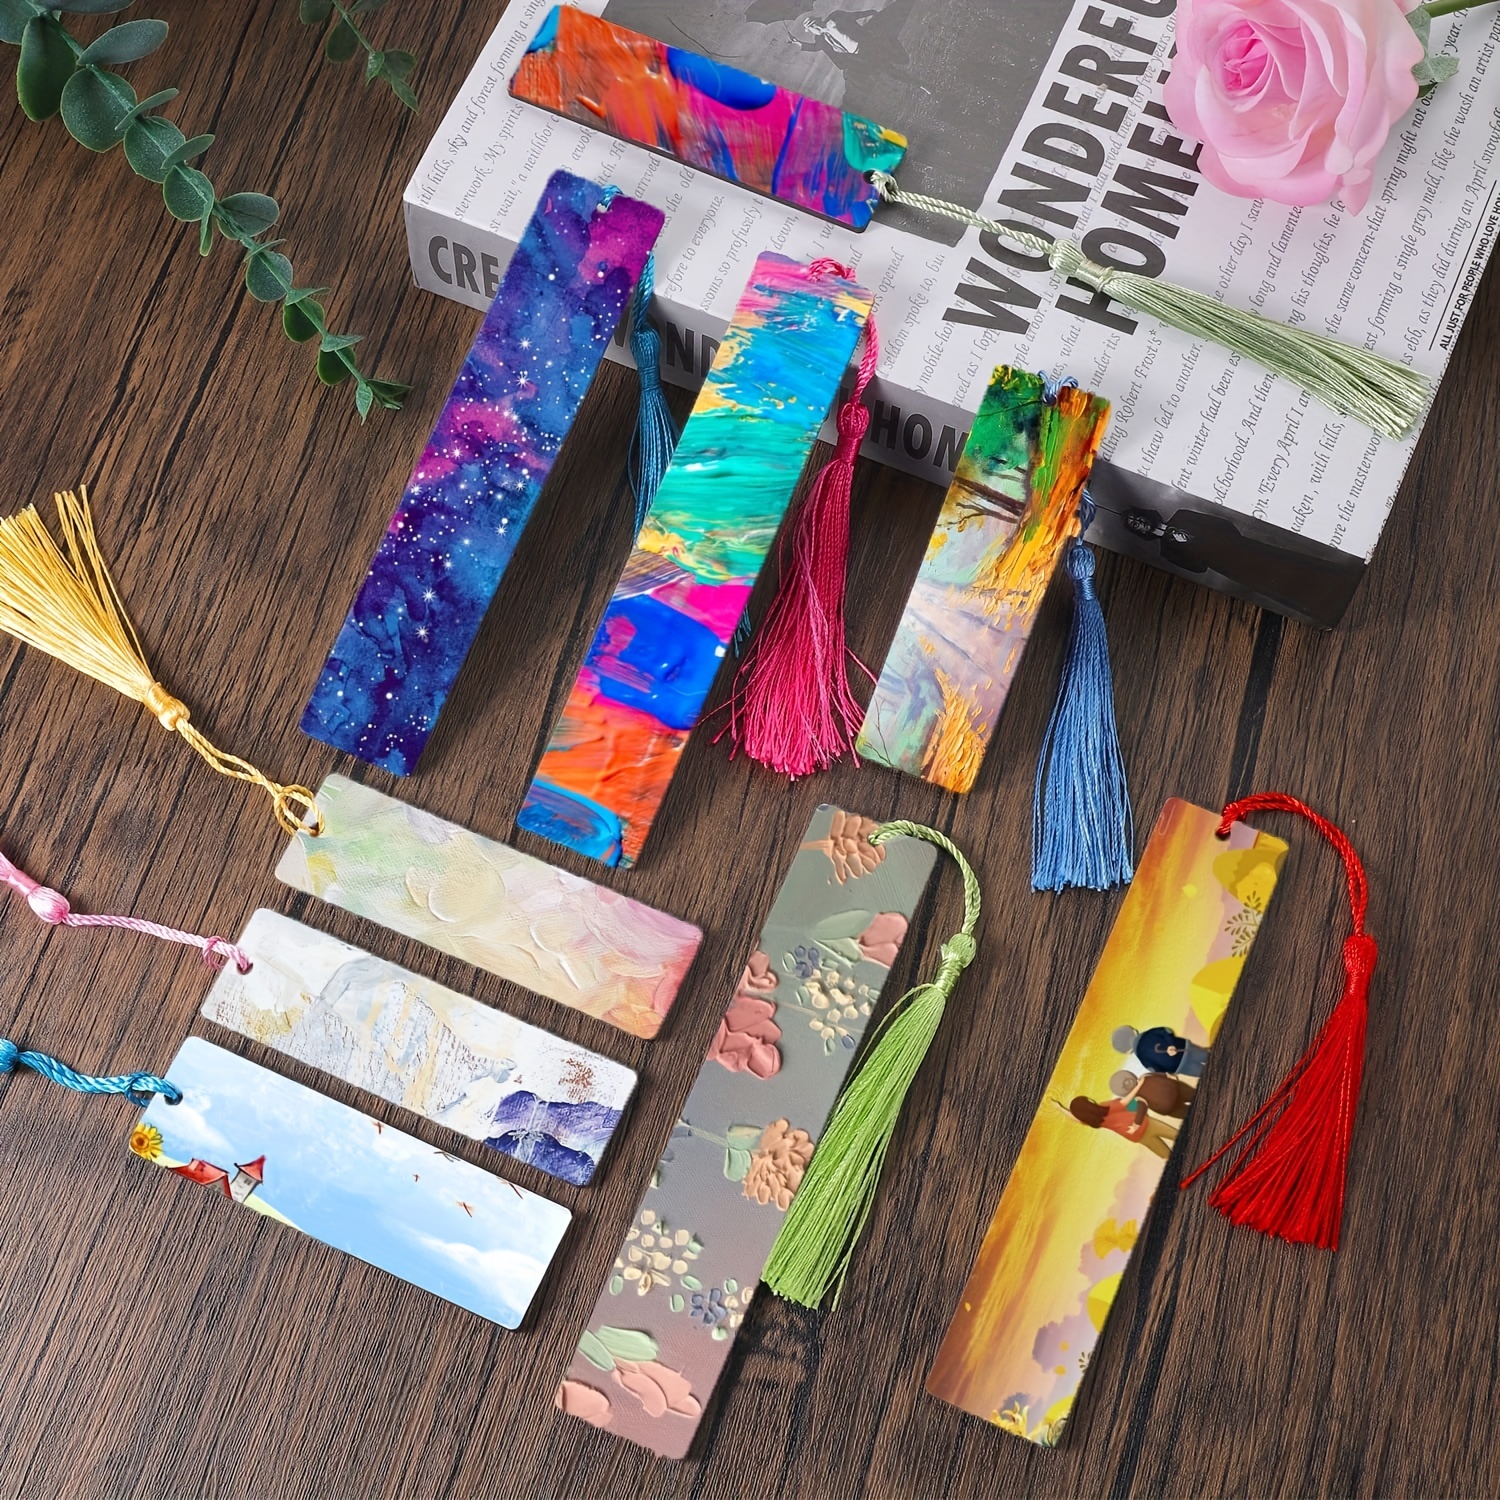 30 Pcs Sublimation Bookmark Blank Heat Transfer Aluminum Metal Bookmarks Bulk DIY Bookmarks with Hole and Colorful Tassels for Crafts,Personalized